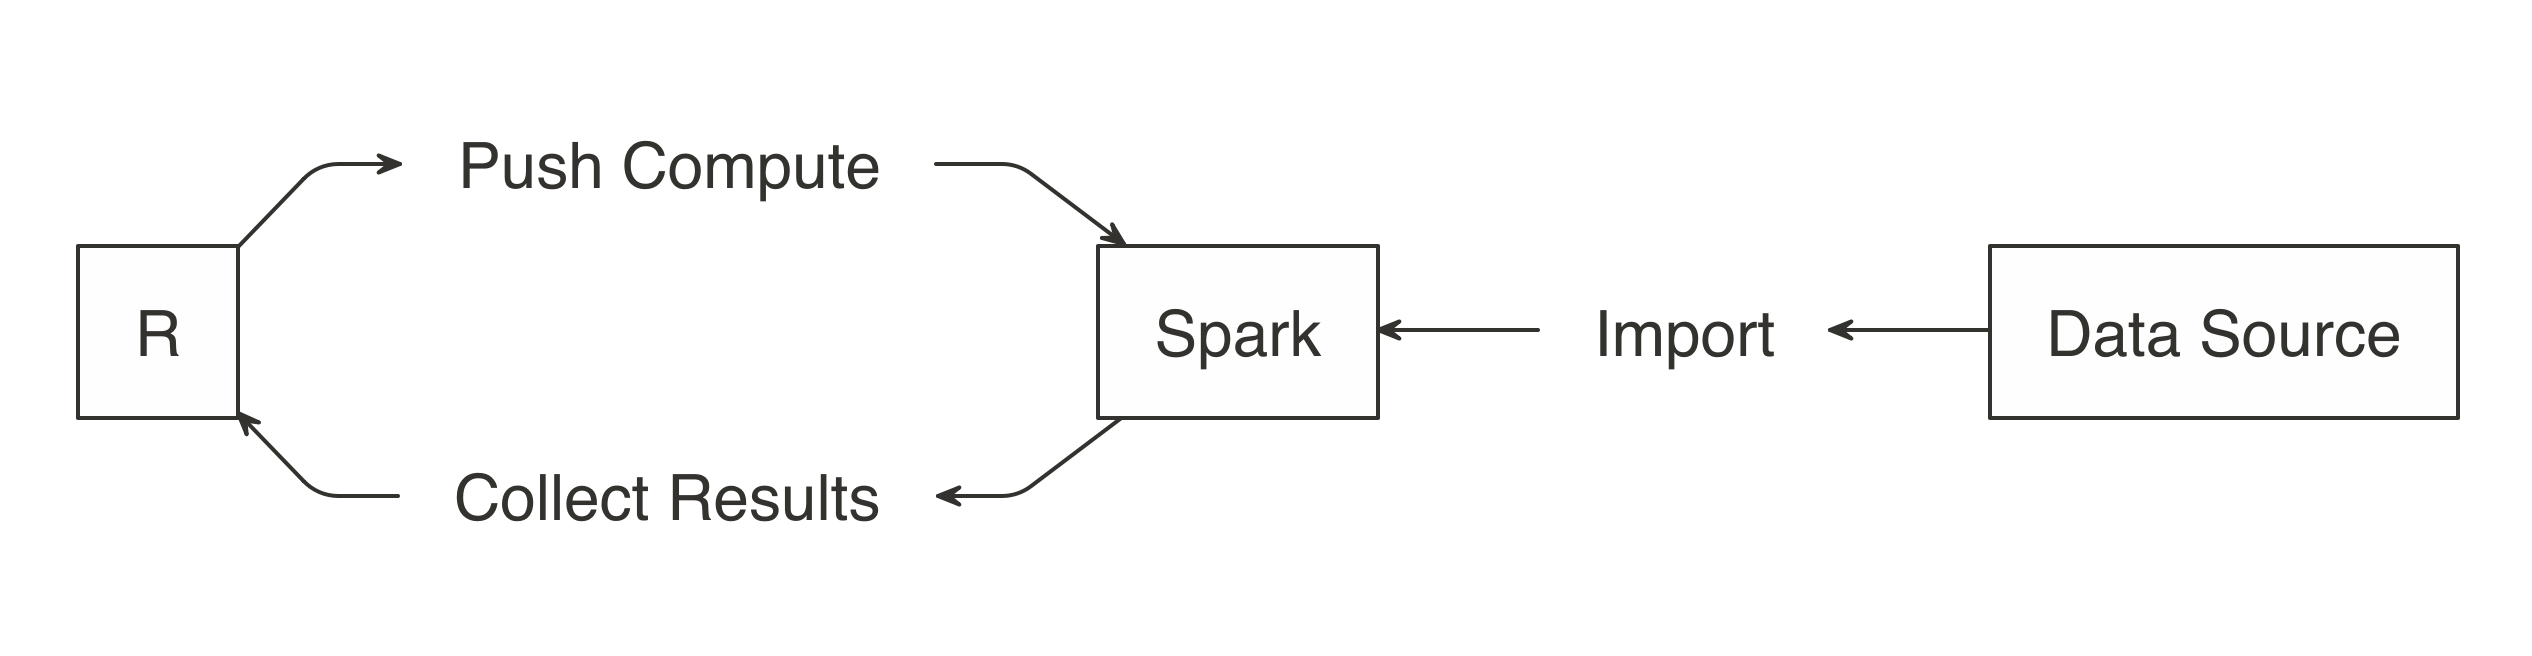 Import data to Spark not R